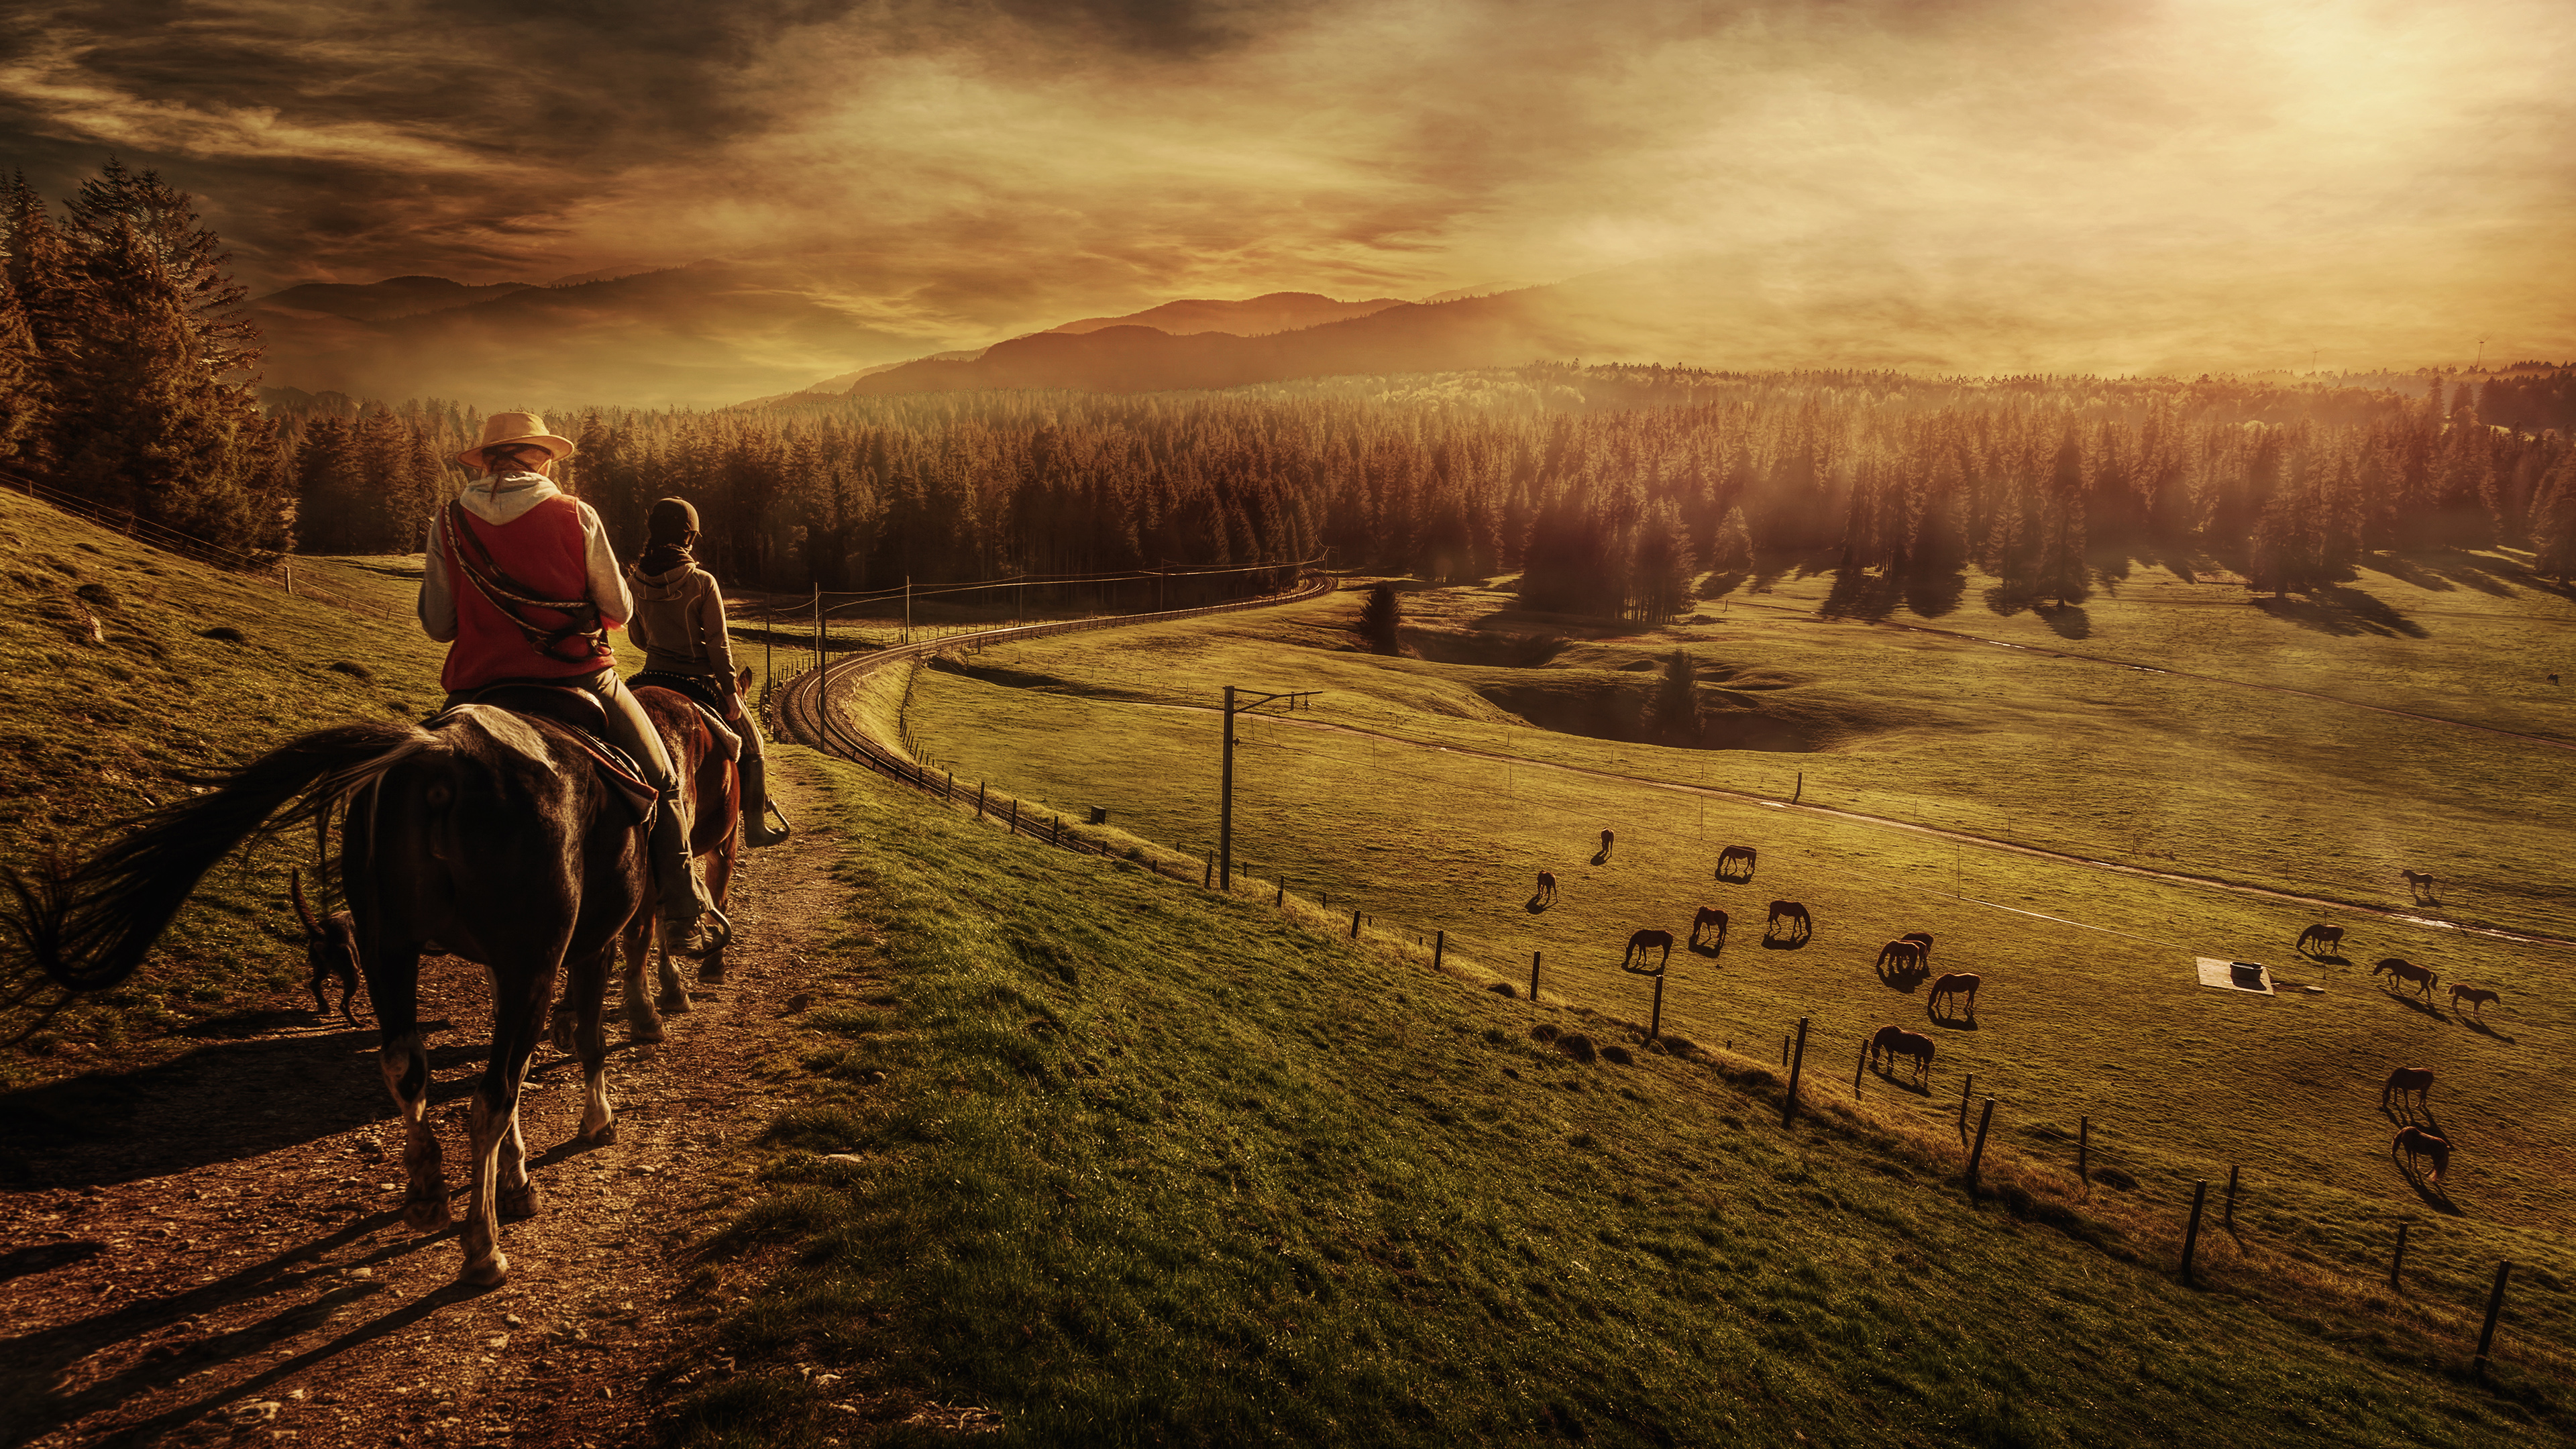 photography, landscape, people, horse, horse riding, sunset lock screen backgrounds